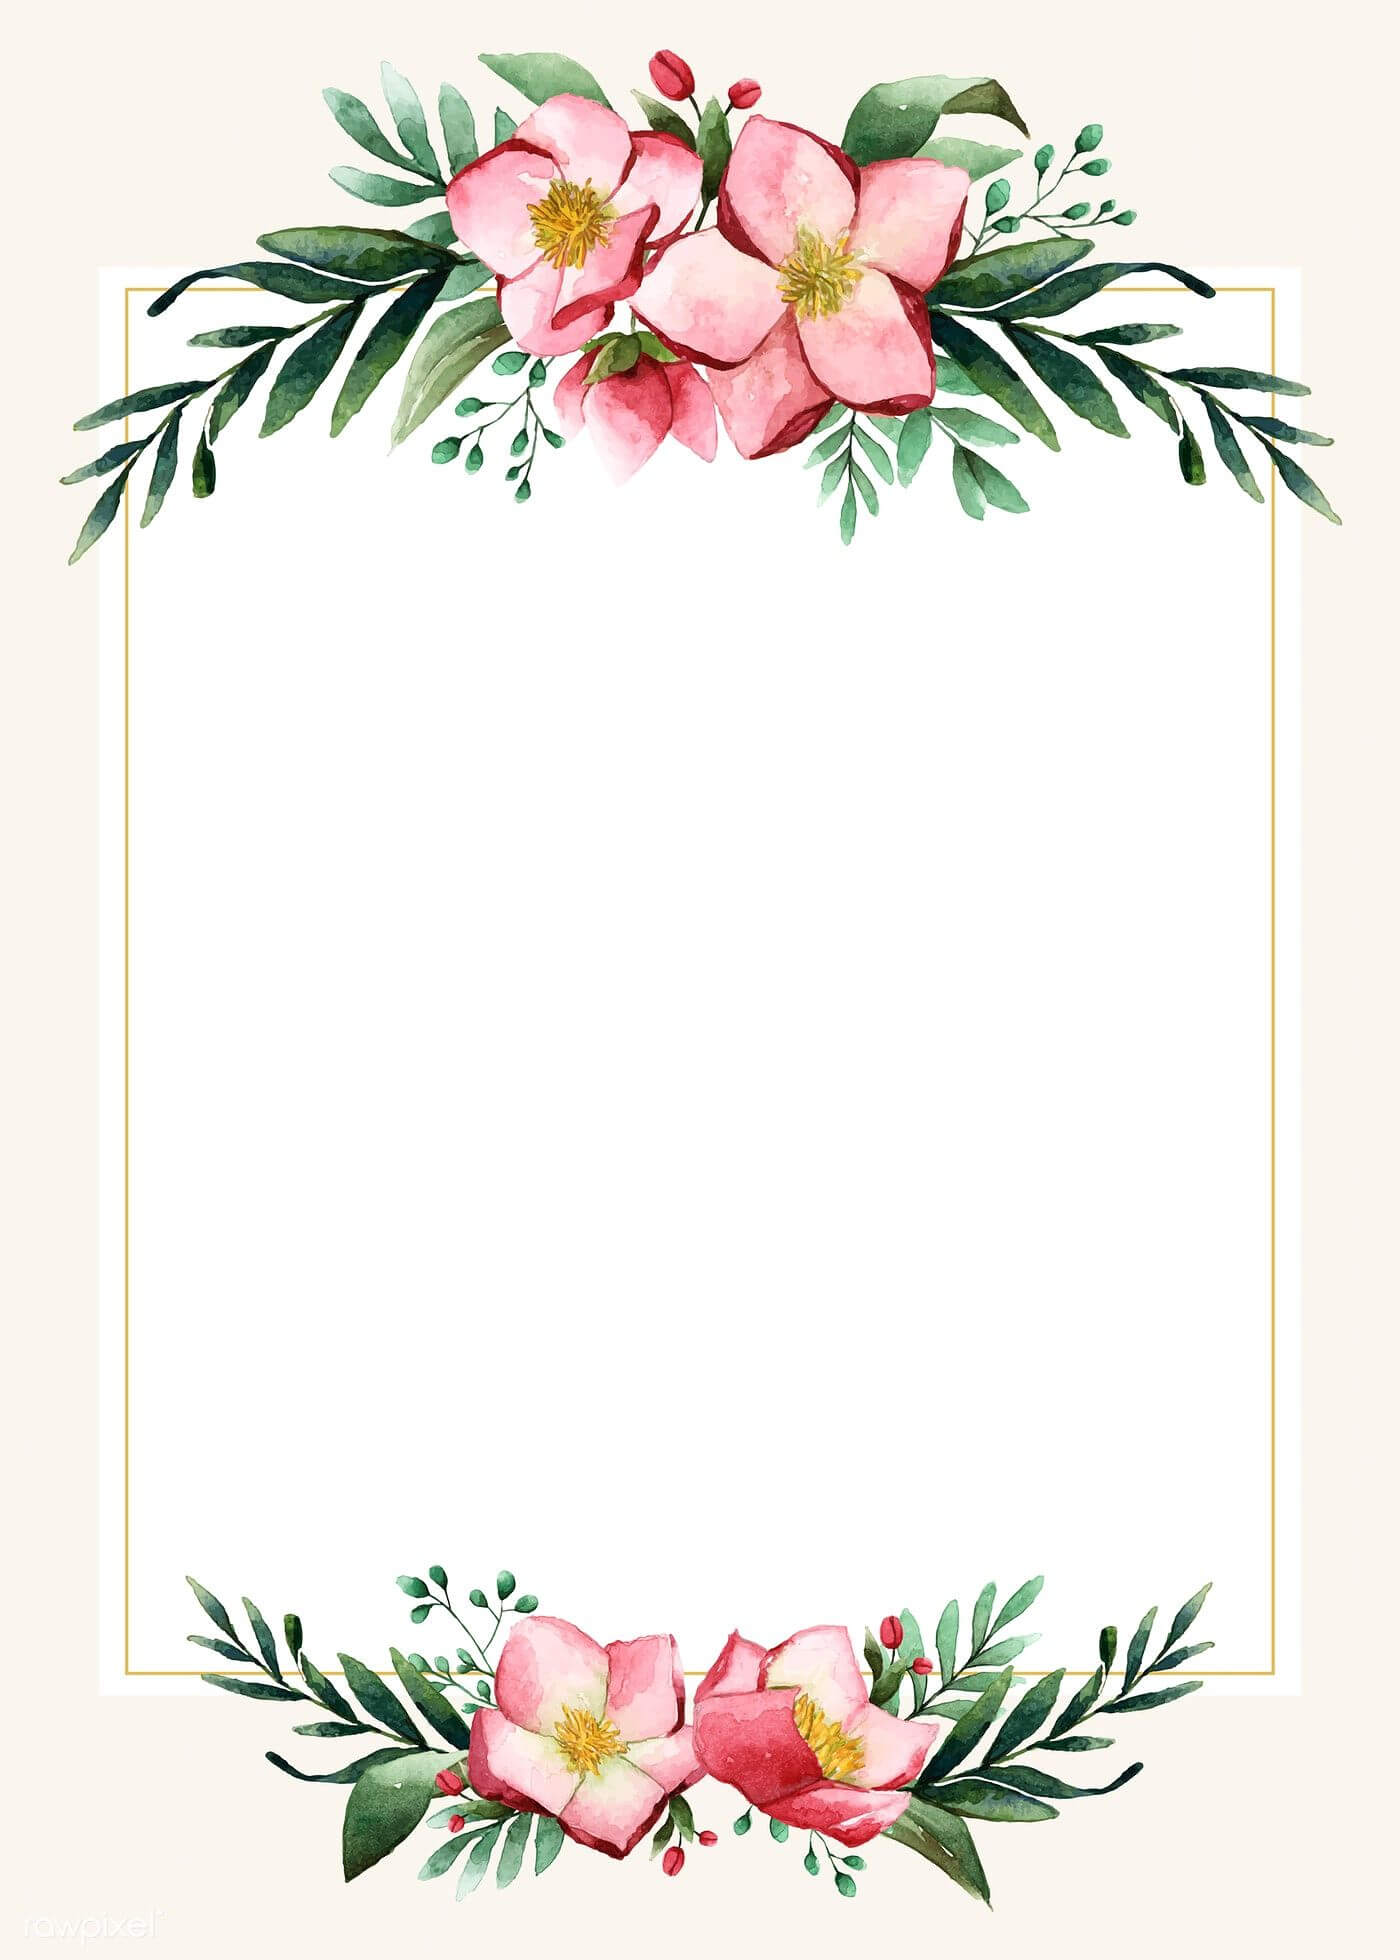 Download Premium Vector Of Flowers Invitation Card Template In Frequent Diner Card Template